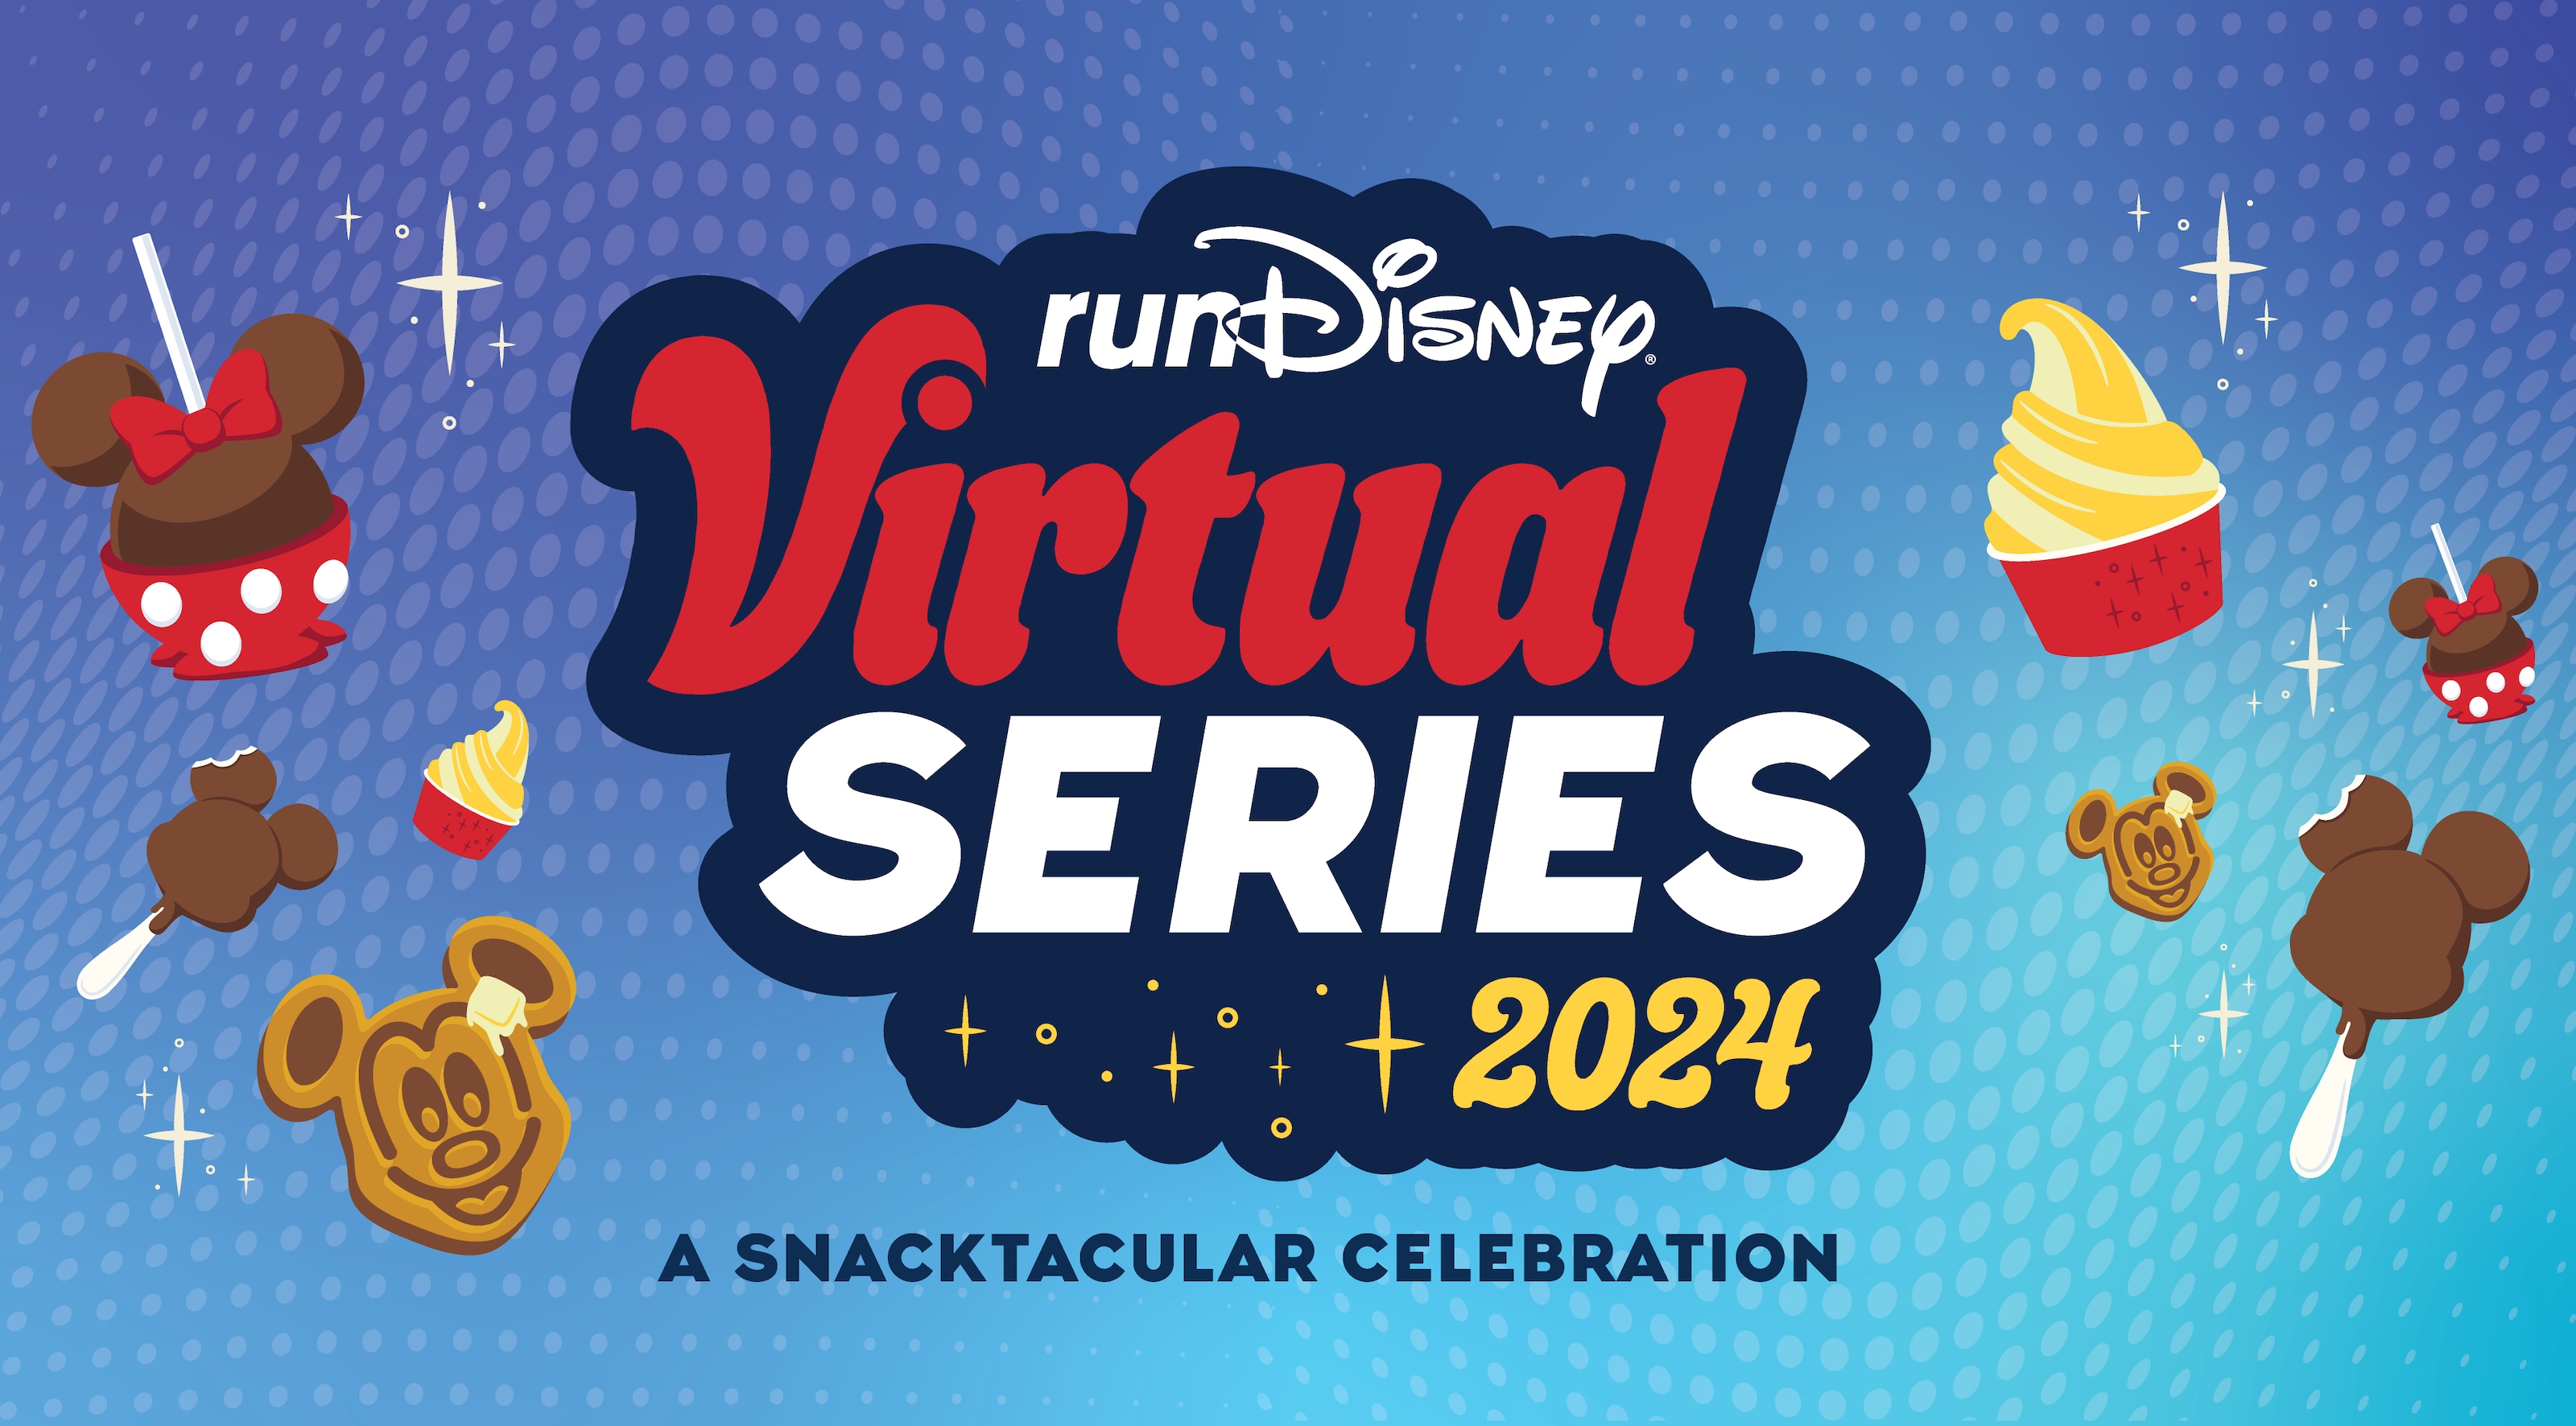 It’s a Snacktacular Celebration During the 2024 runDisney Virtual